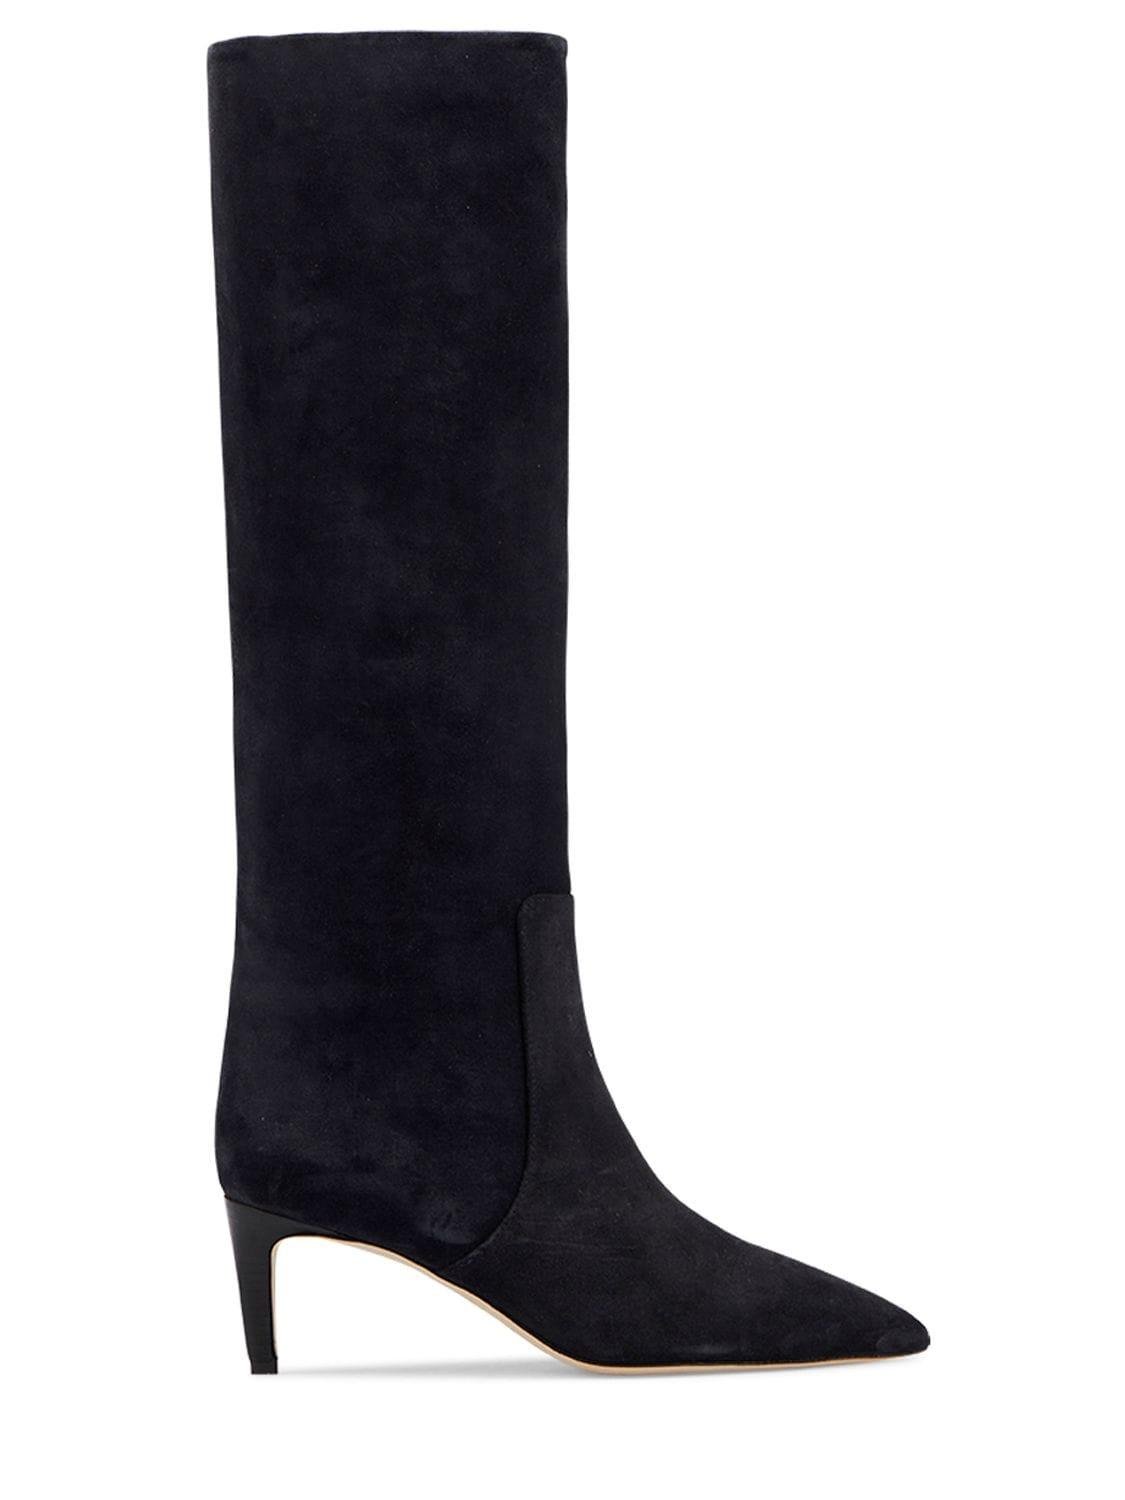 60mm Stiletto Leather Tall Boots by PARIS TEXAS